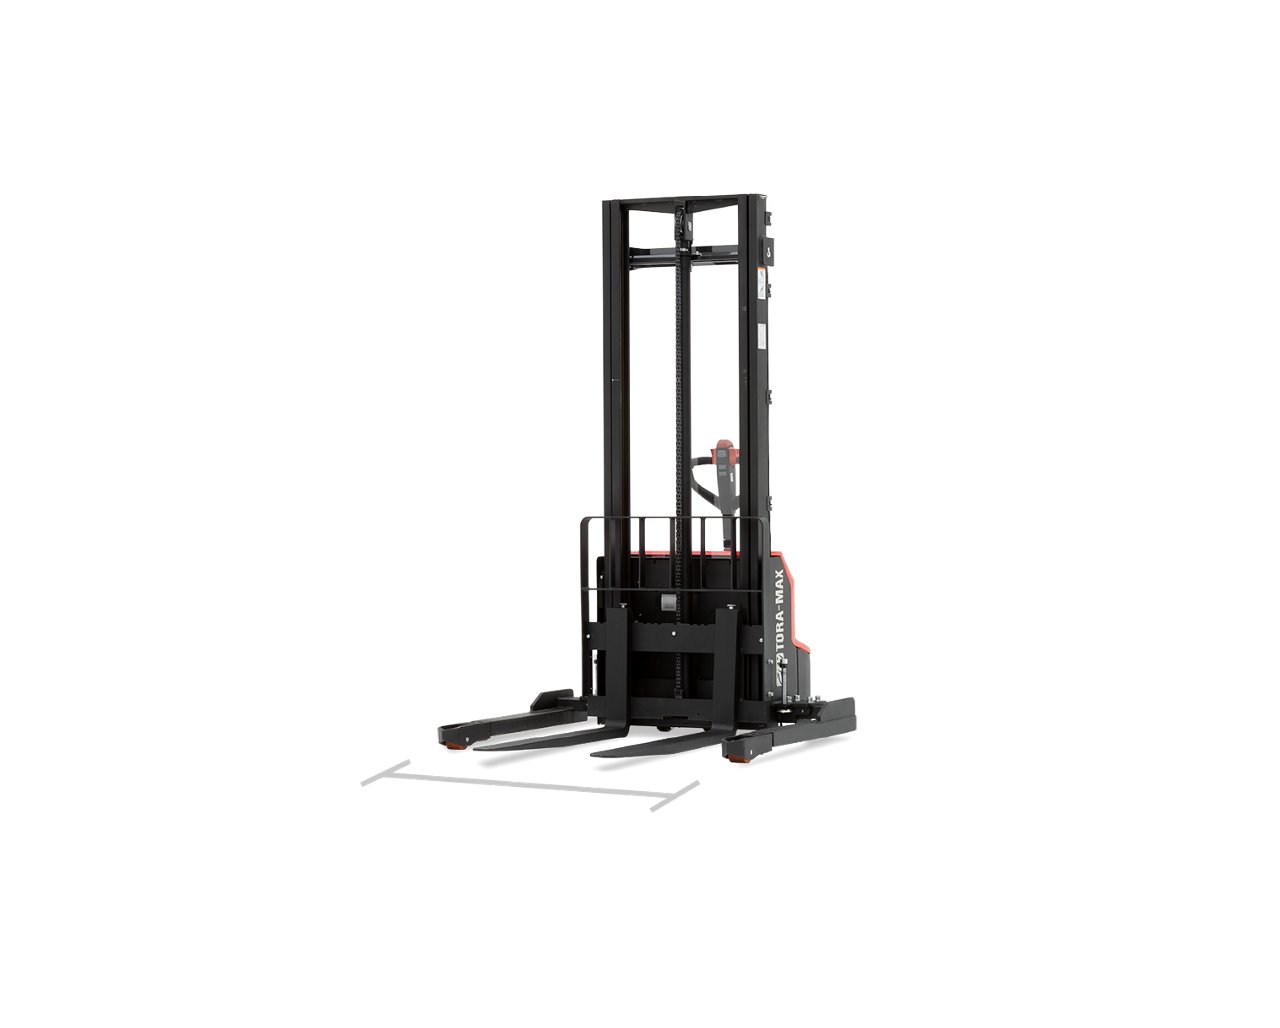 Image of stacker forklift with a line to show how wide the front of the forks are